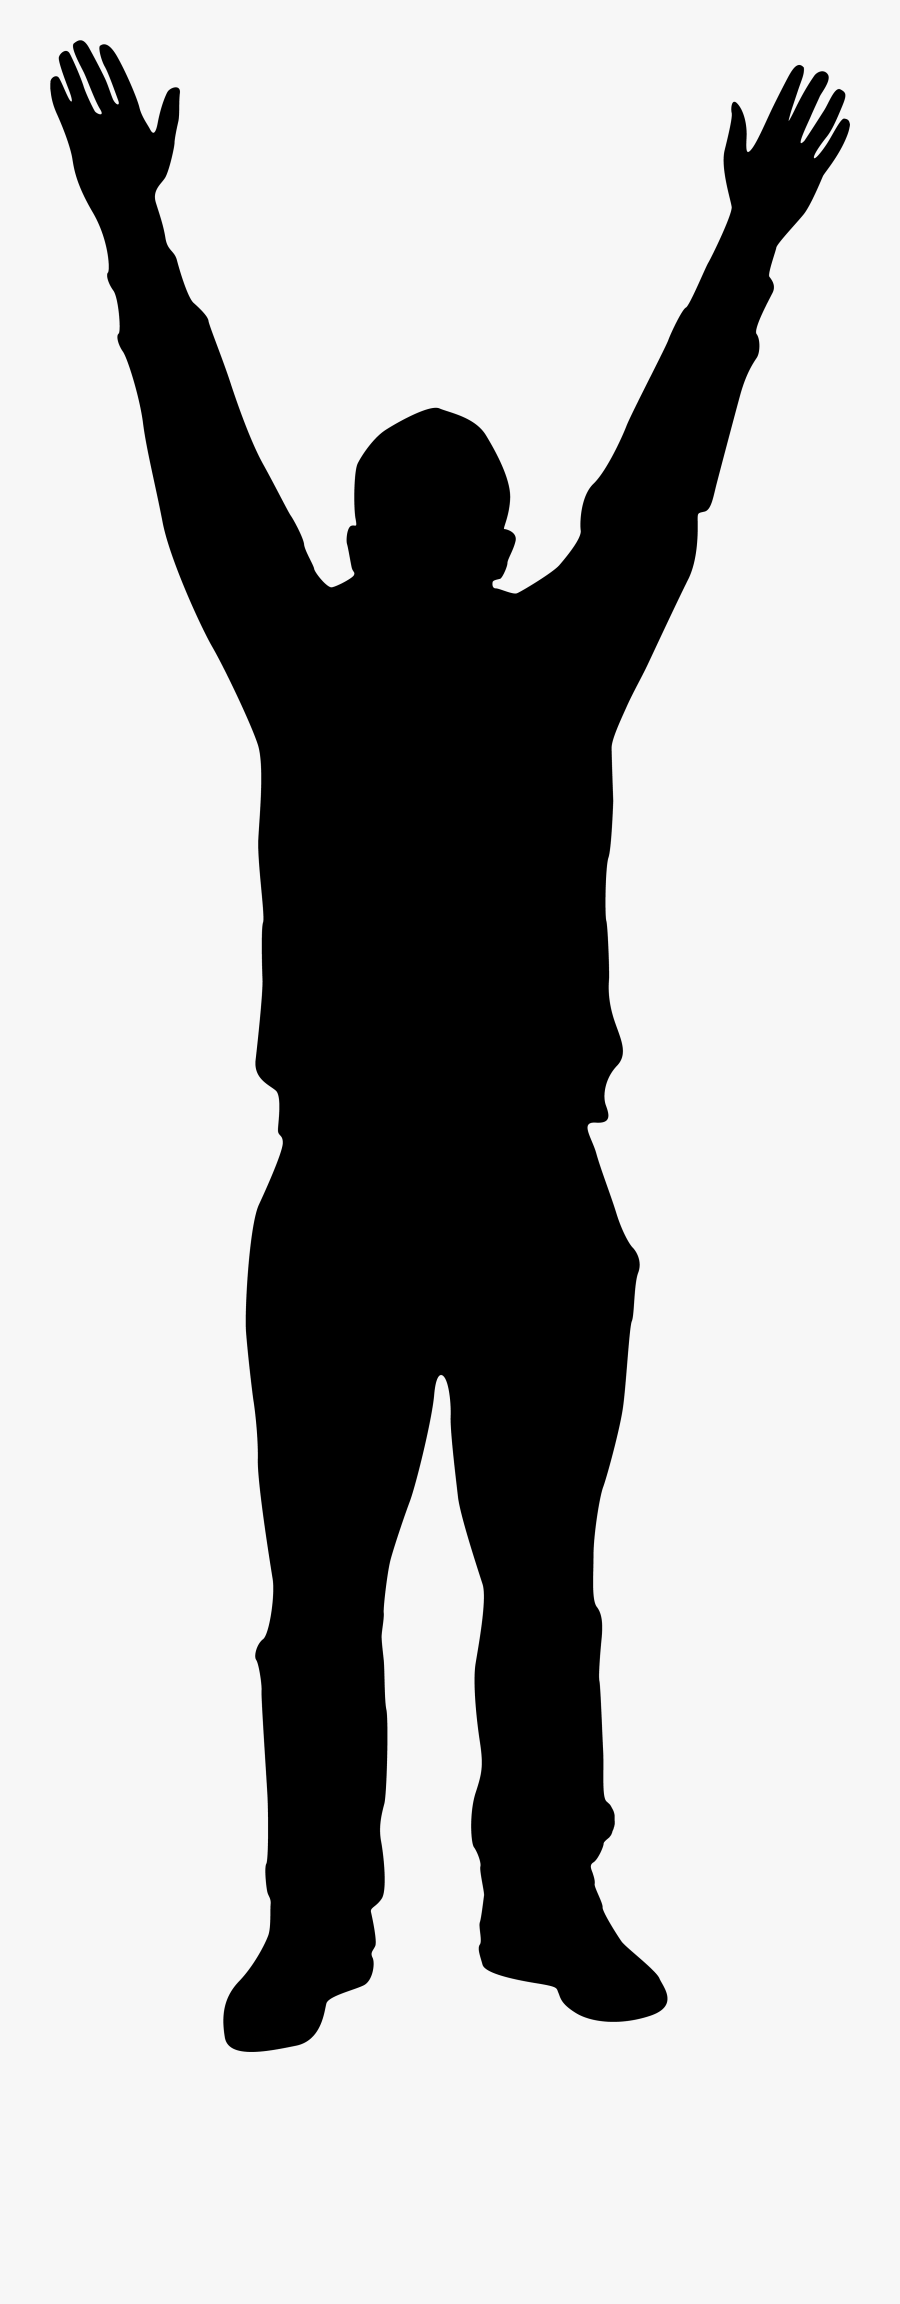 Man With Hands Up Silhouette Png Clip Art Image - Man With Hands Up Silhouette, Transparent Clipart